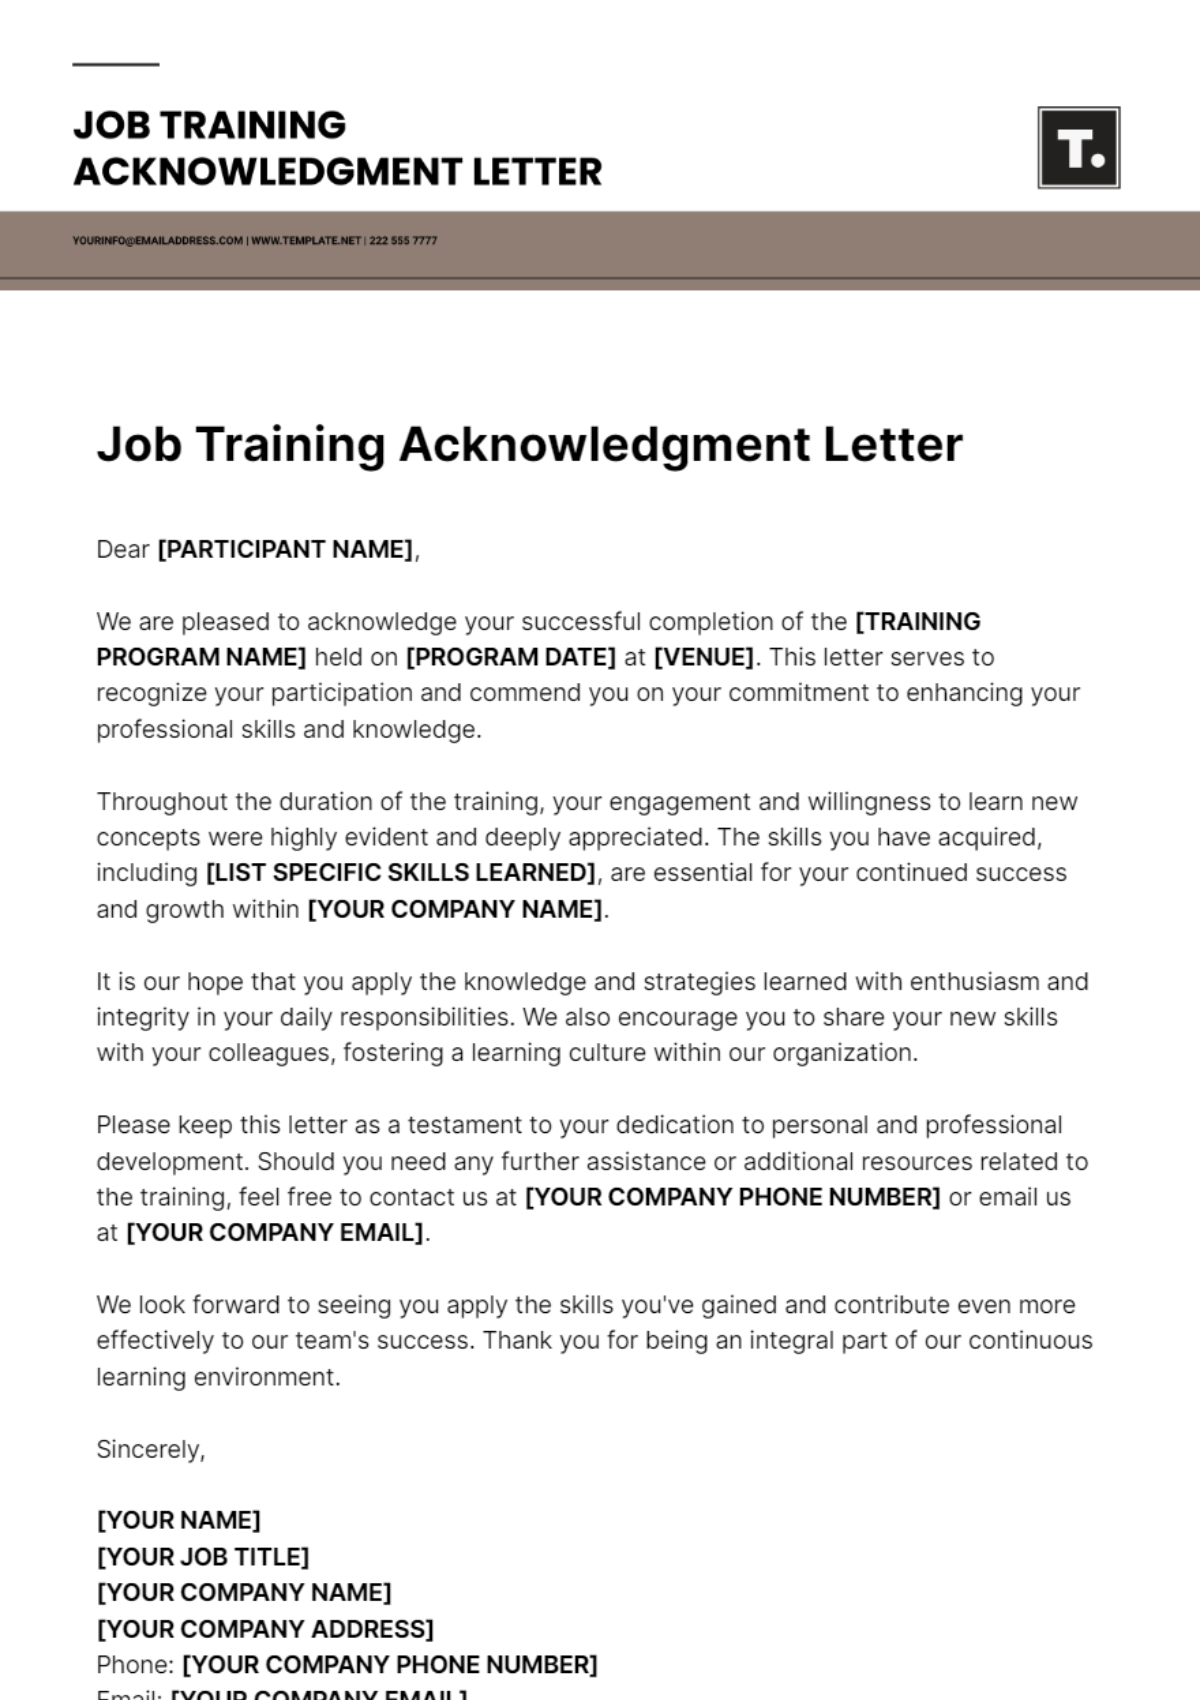 Job Training Acknowledgment Letter Template